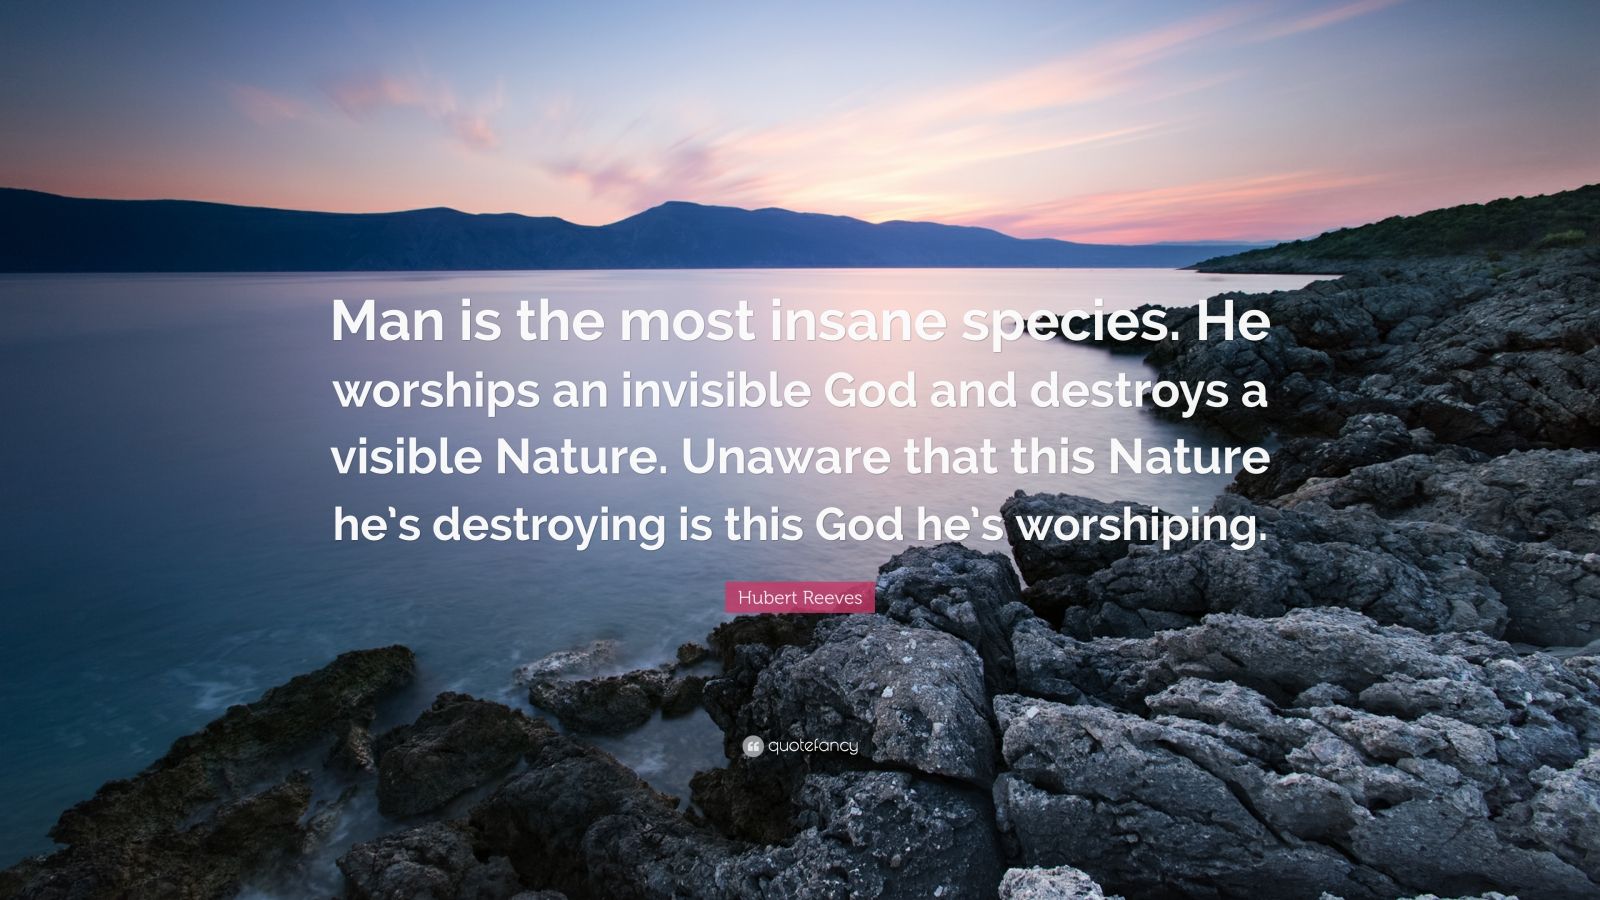 Hubert Reeves Quote: “Man is the most insane species. He worships an